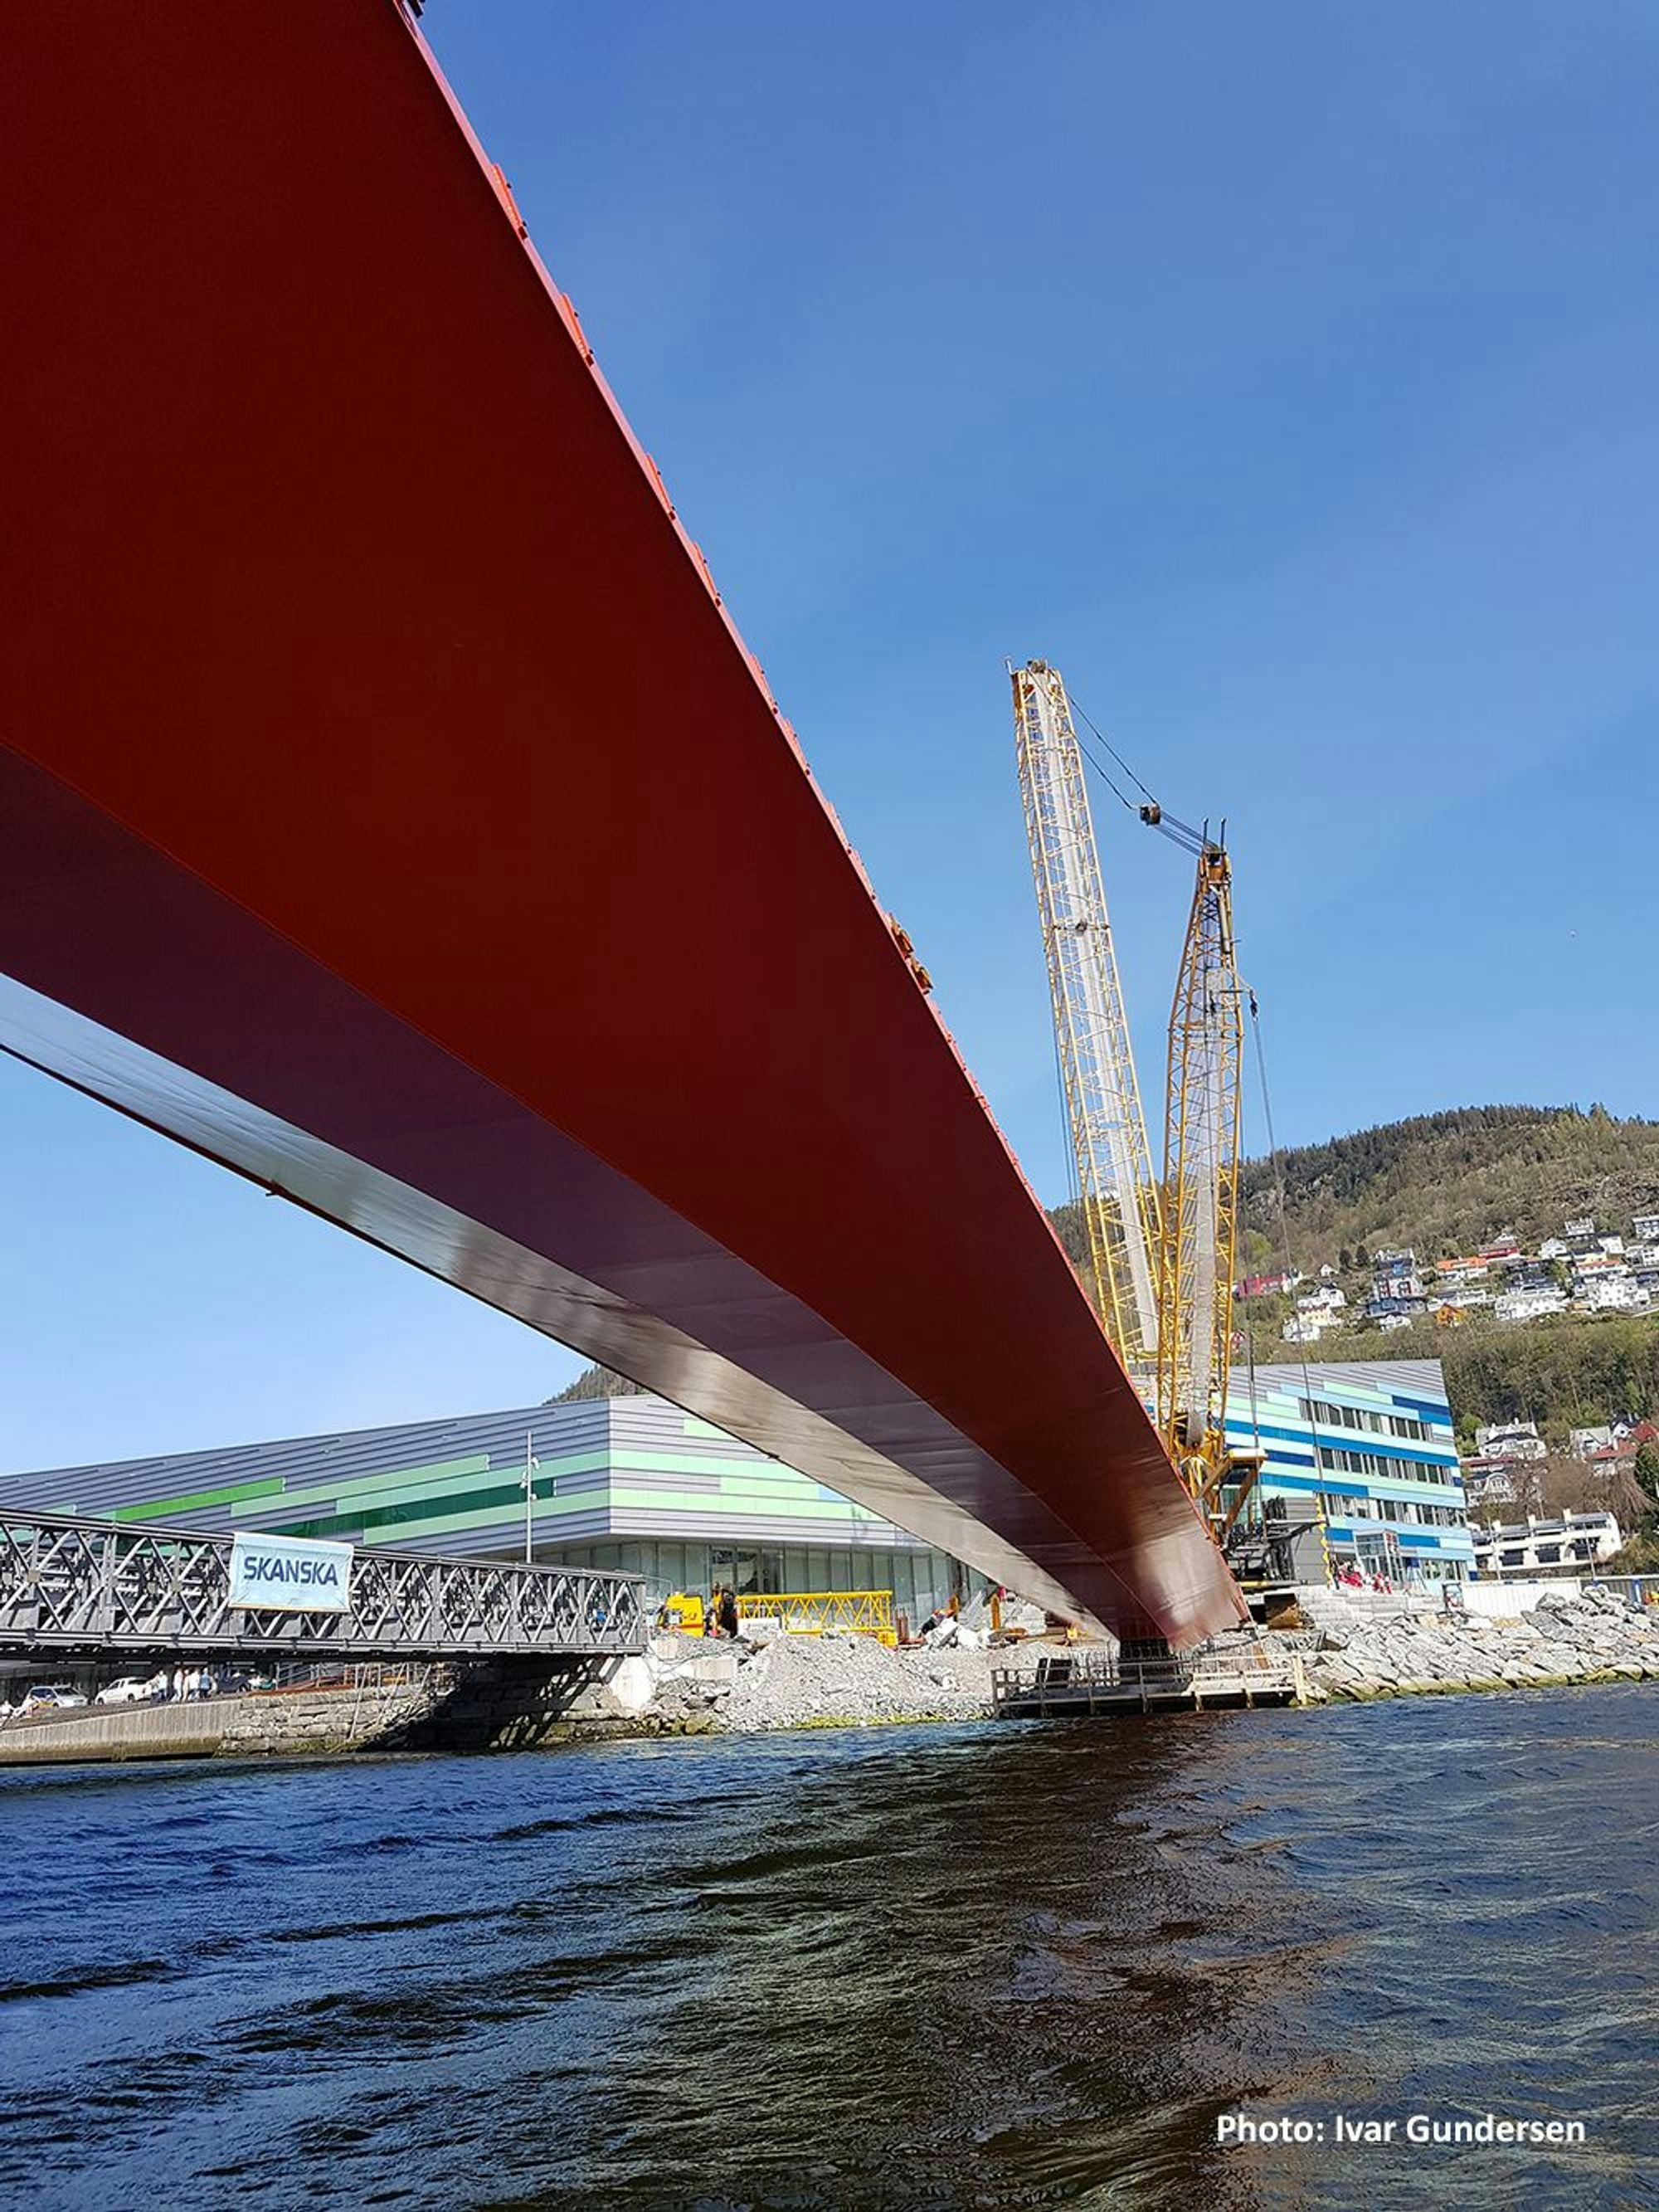 A large red bridge under construction with the aid of cranes